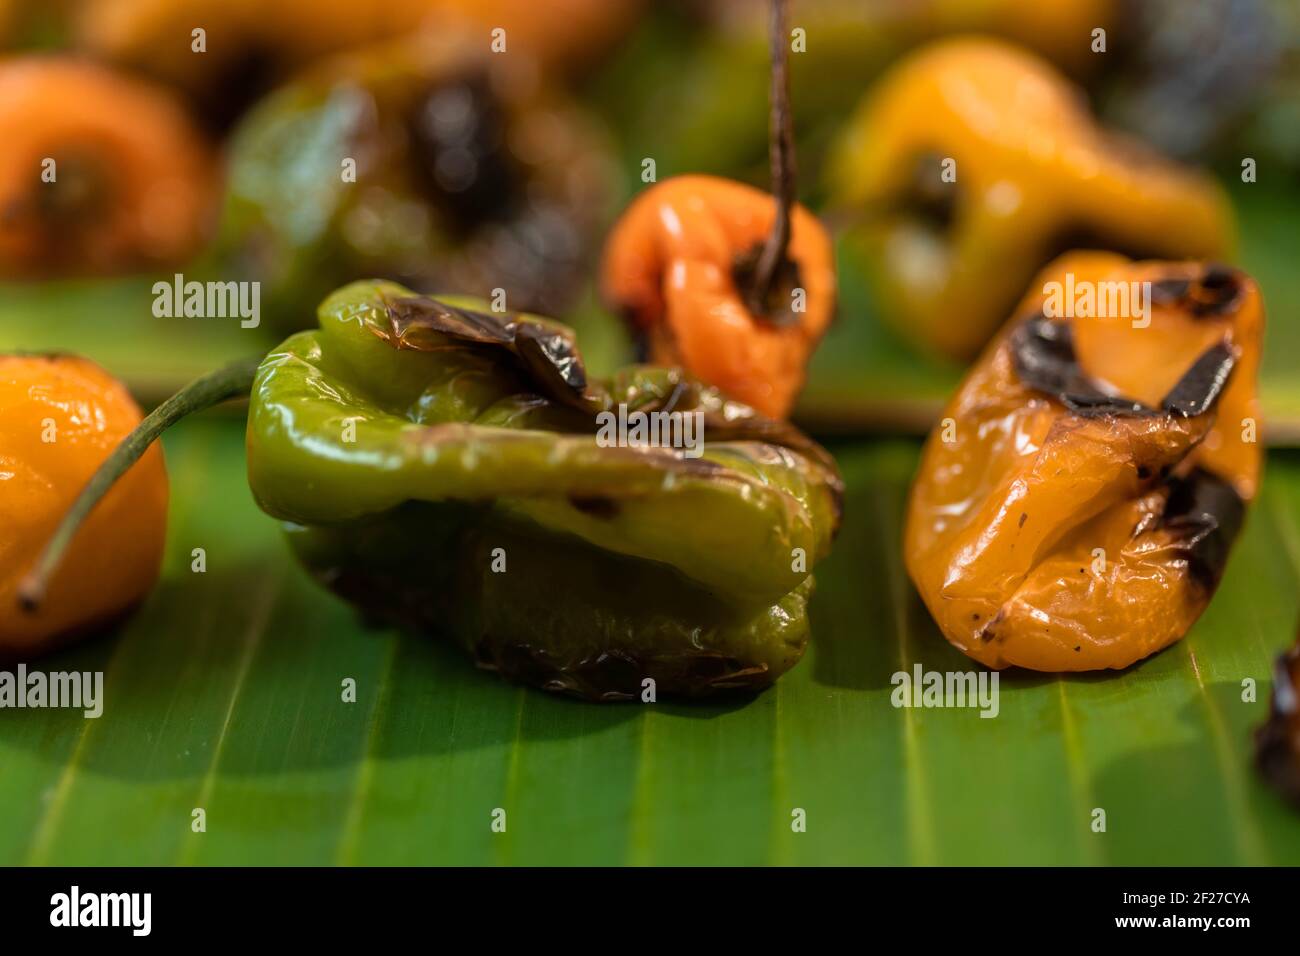 Closeup shot of grilled tasty bell peppers on a green surface, lightly burned habanero peppers for spicy Mexican sauce Stock Photo